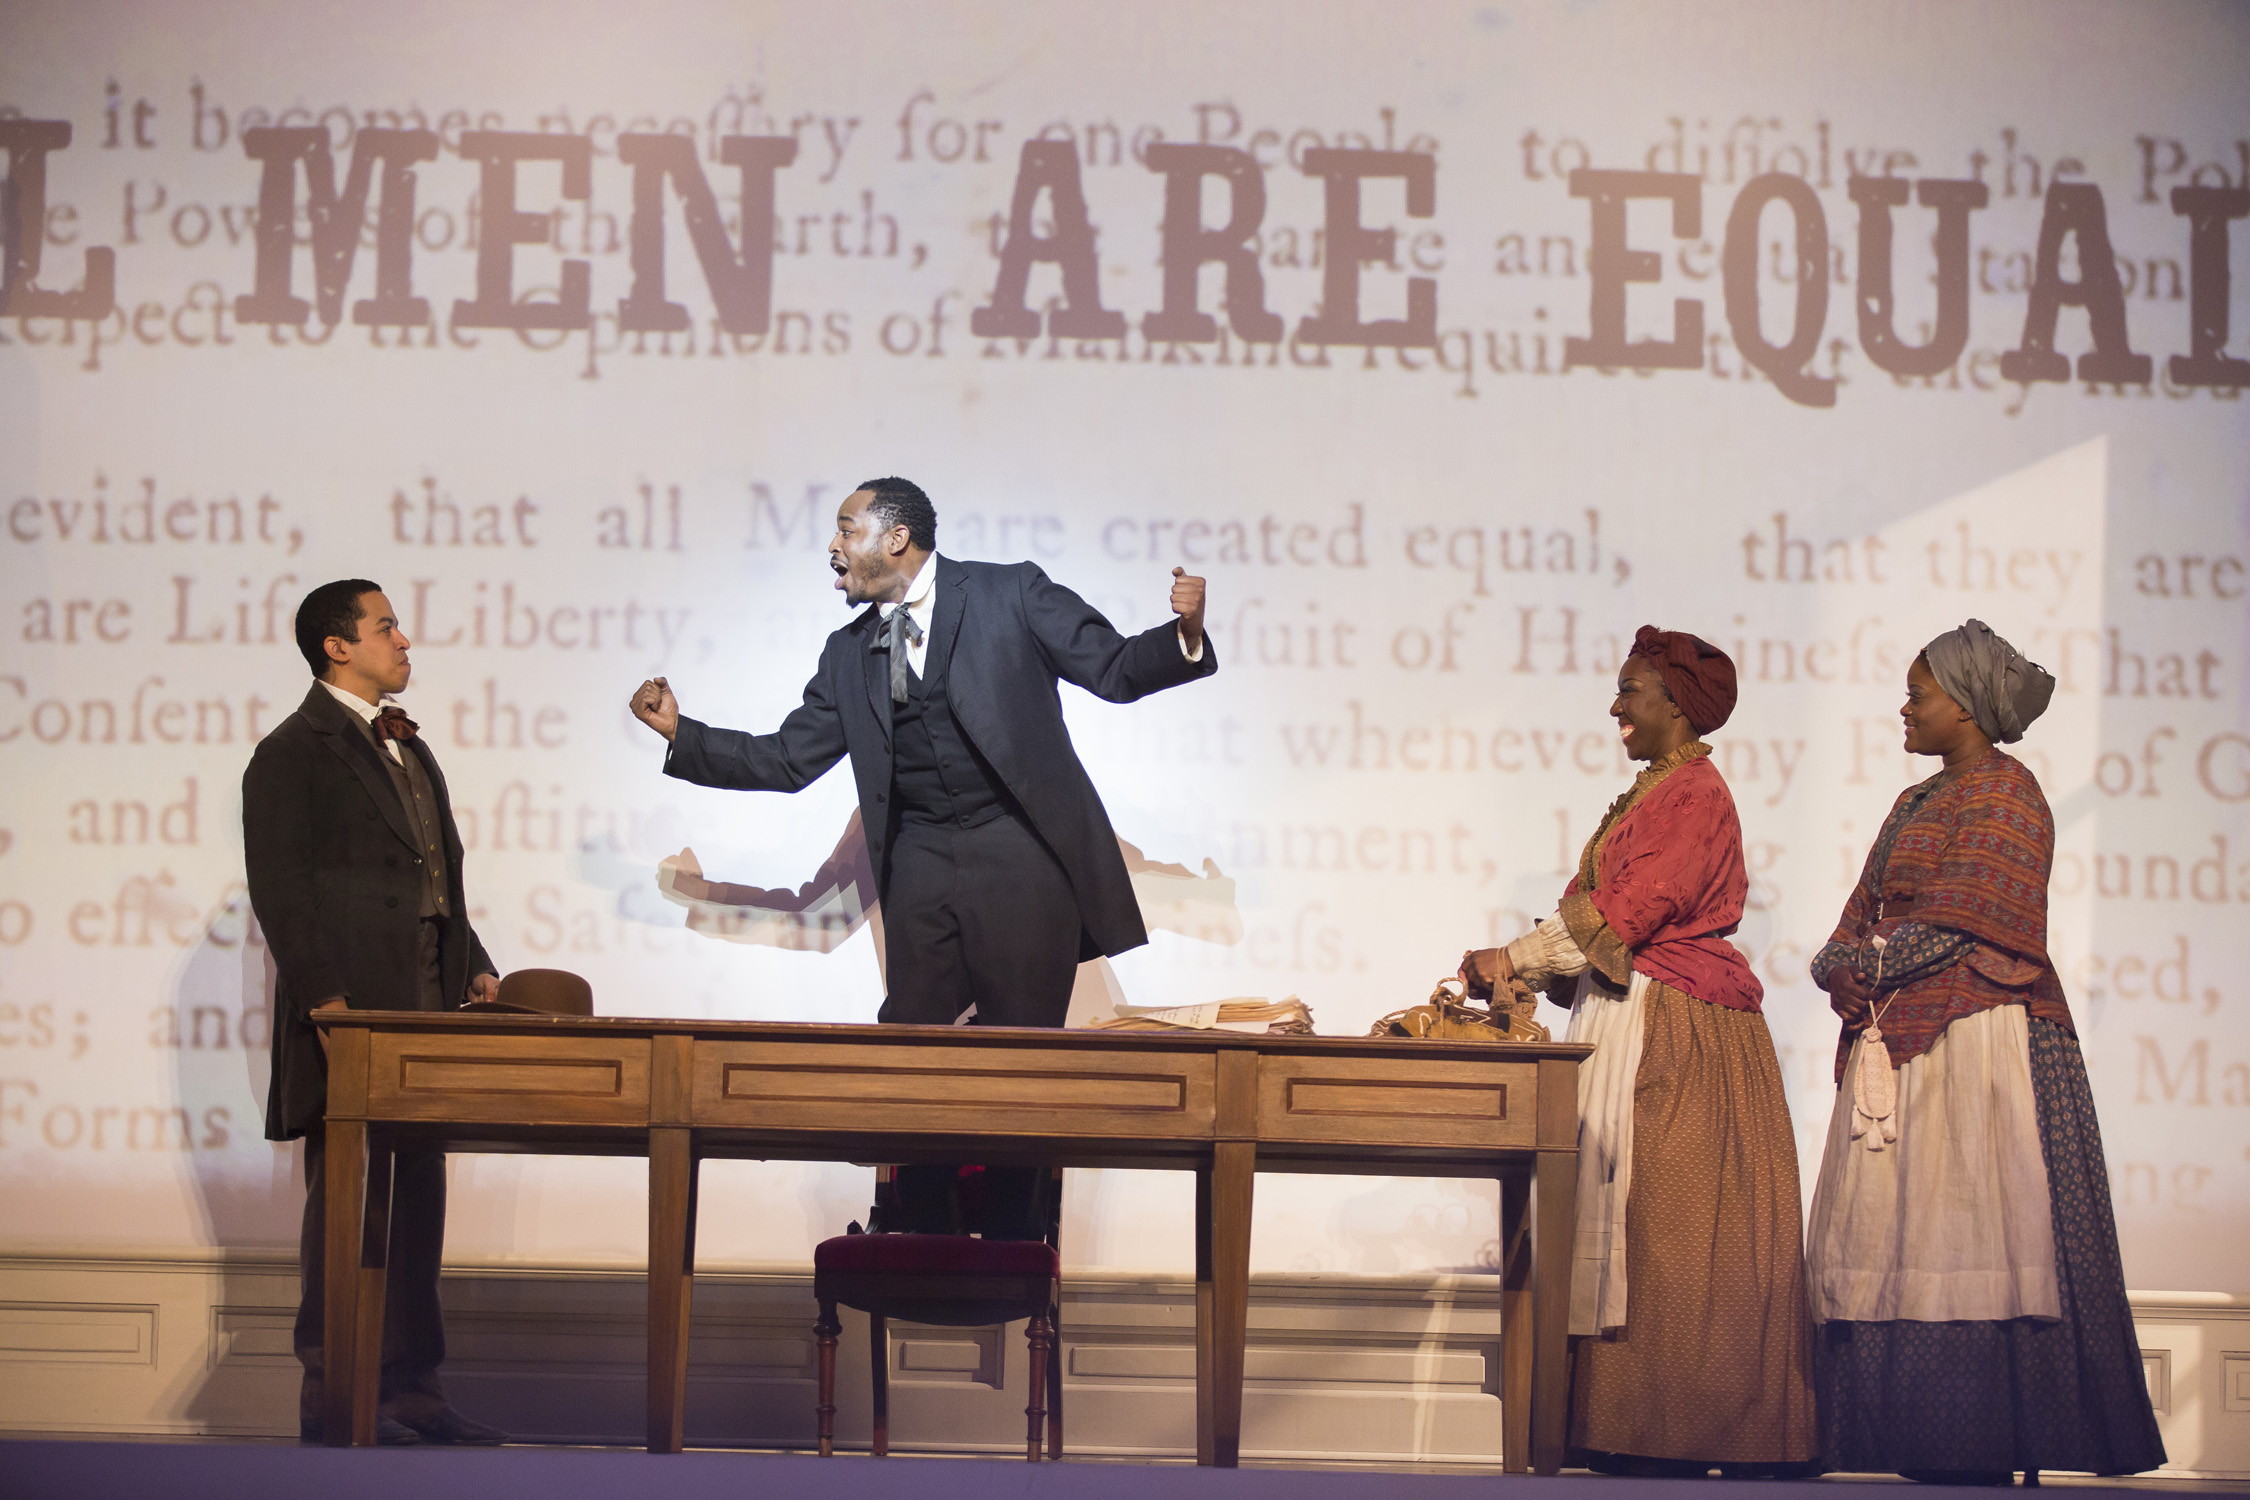 An African-American man stands on a chair behind a table and gives a speech. Two women and a man listen to him. Behind him the text of the Declaration of Independence is projected, with the words "All Men Are Equal" superimposed.